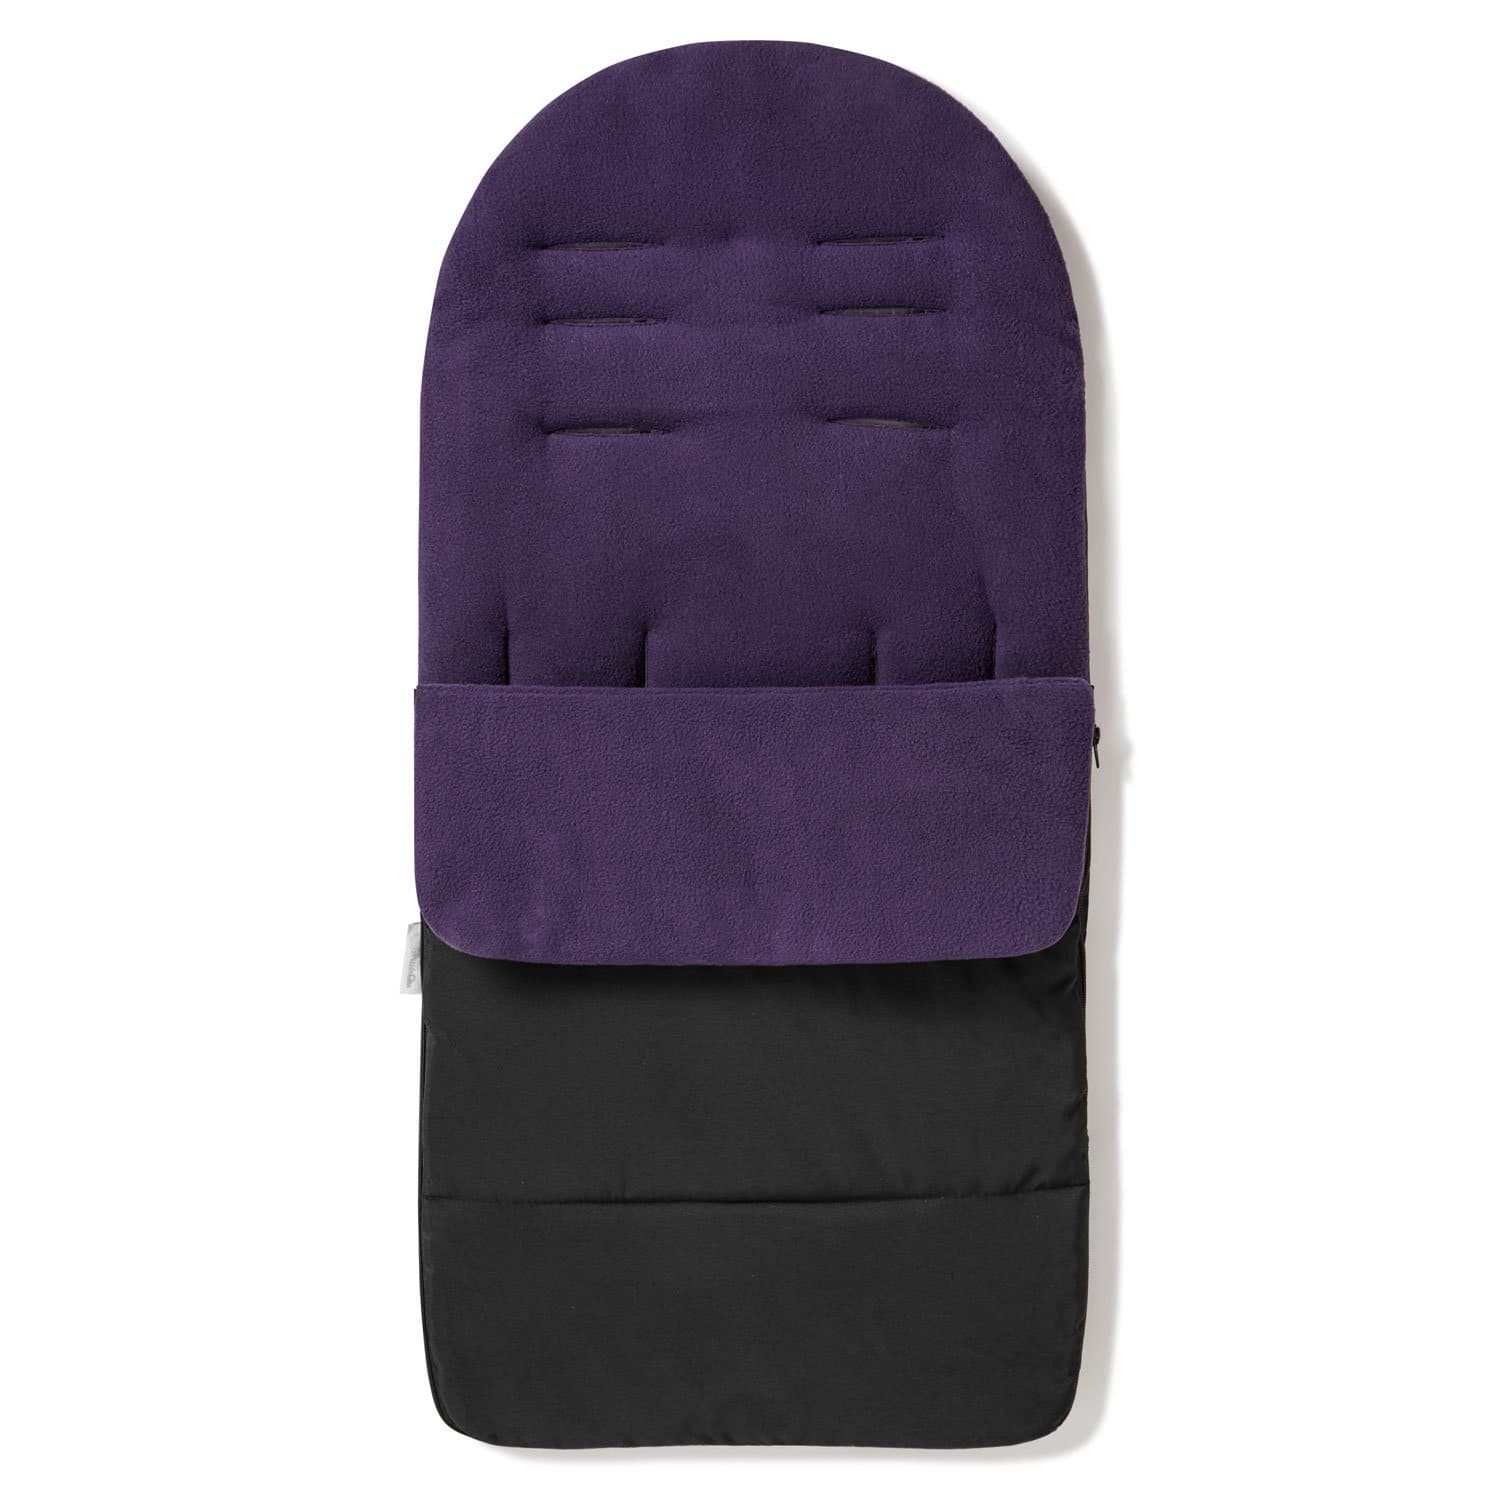 Premium Footmuff / Cosy Toes Compatible with Uppababy - Plum Purple / Fits All Models | For Your Little One